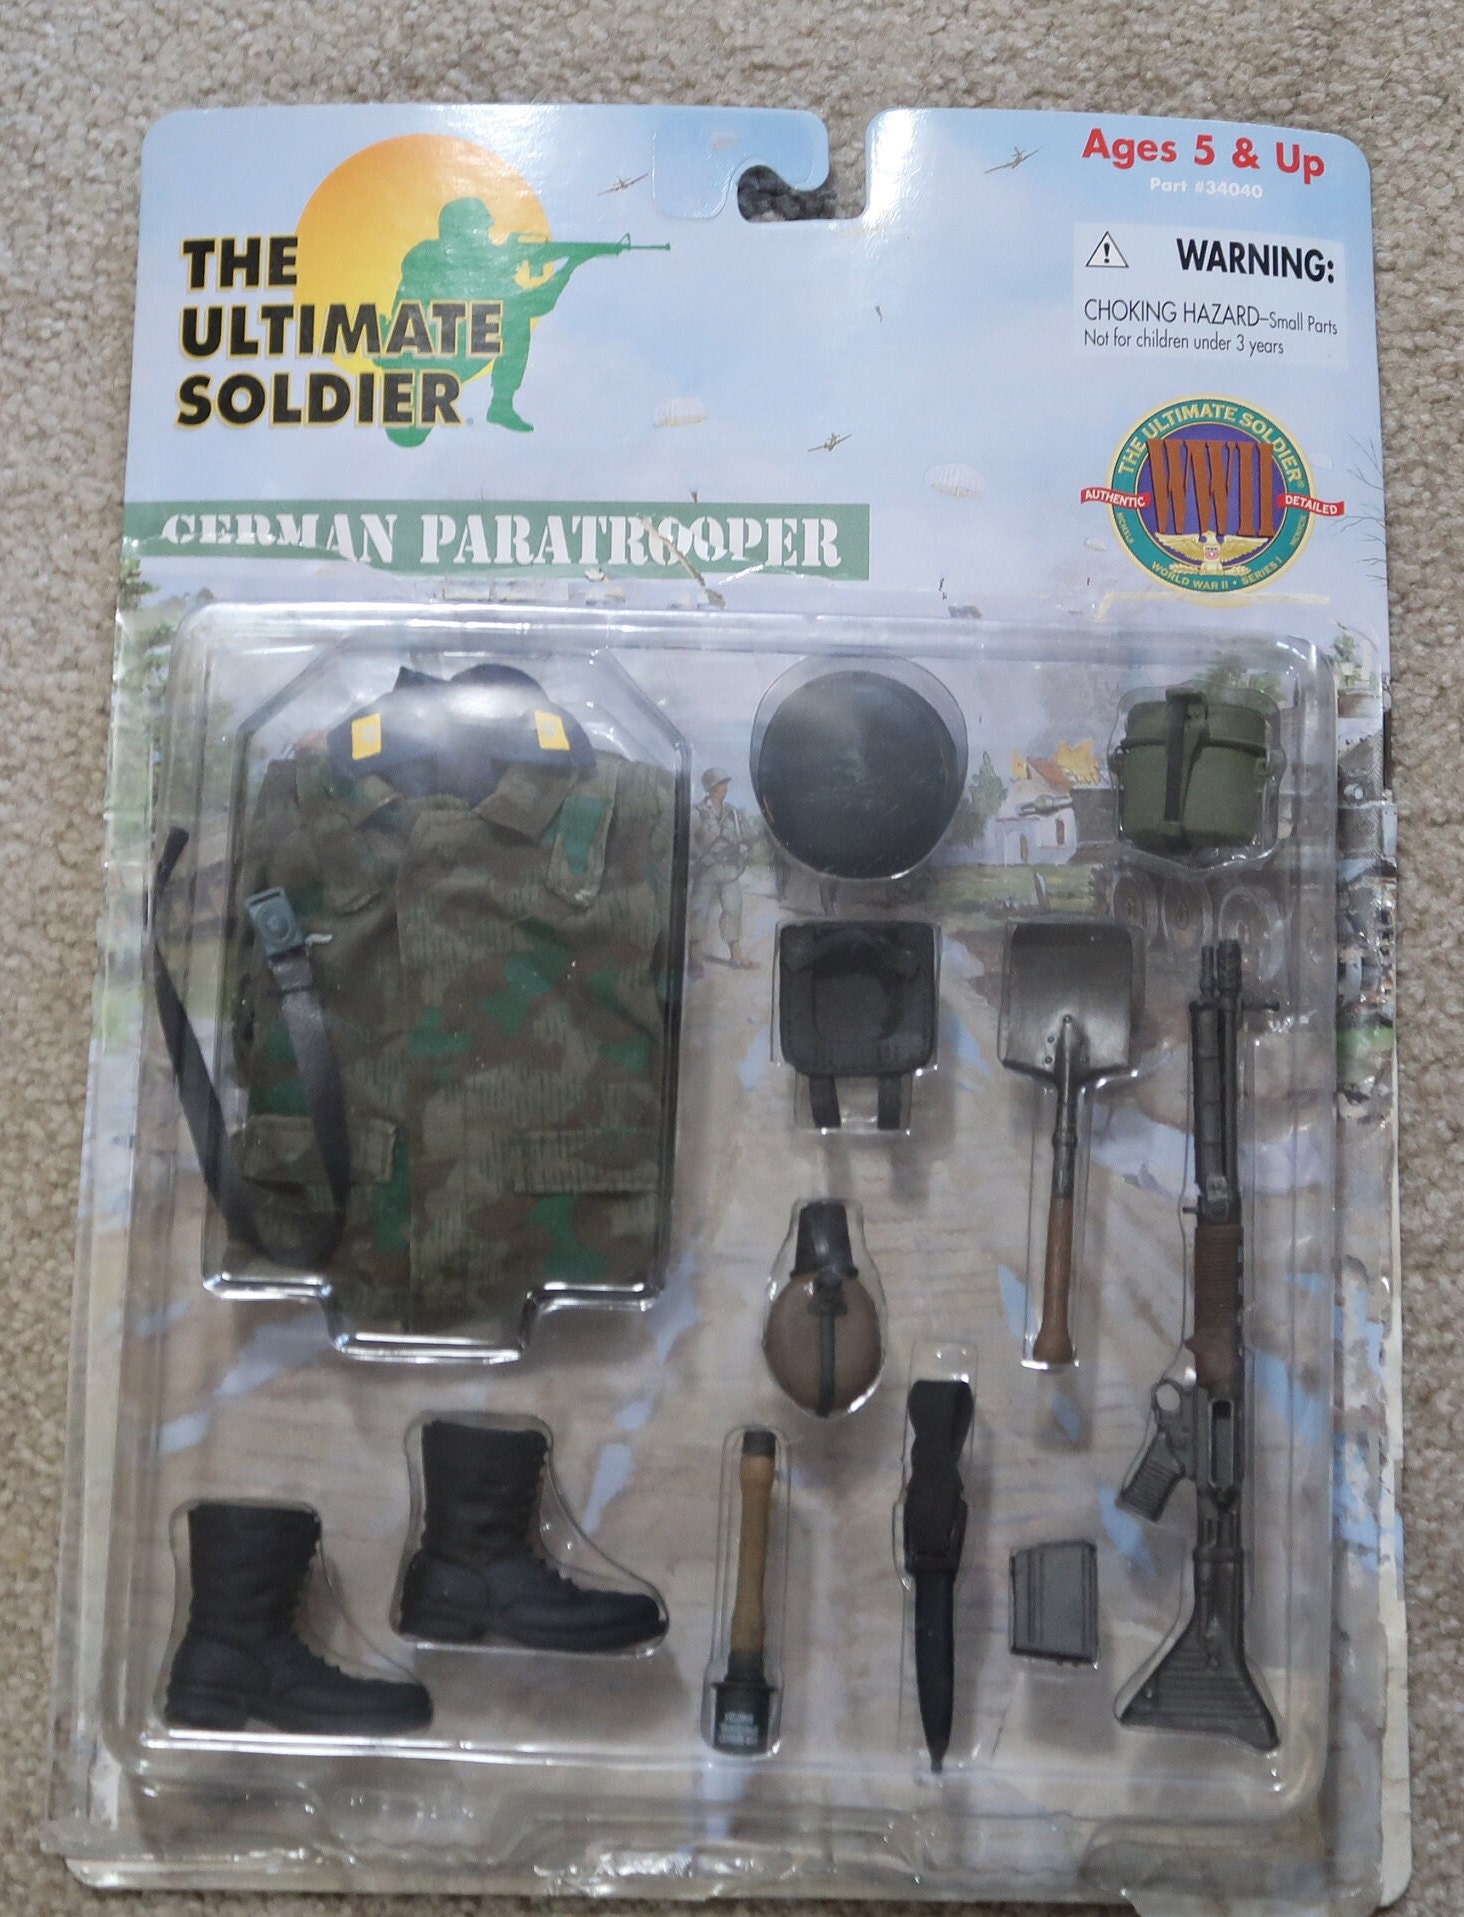 1999 German Paratrooper the Ultimate Soldier by - Etsy